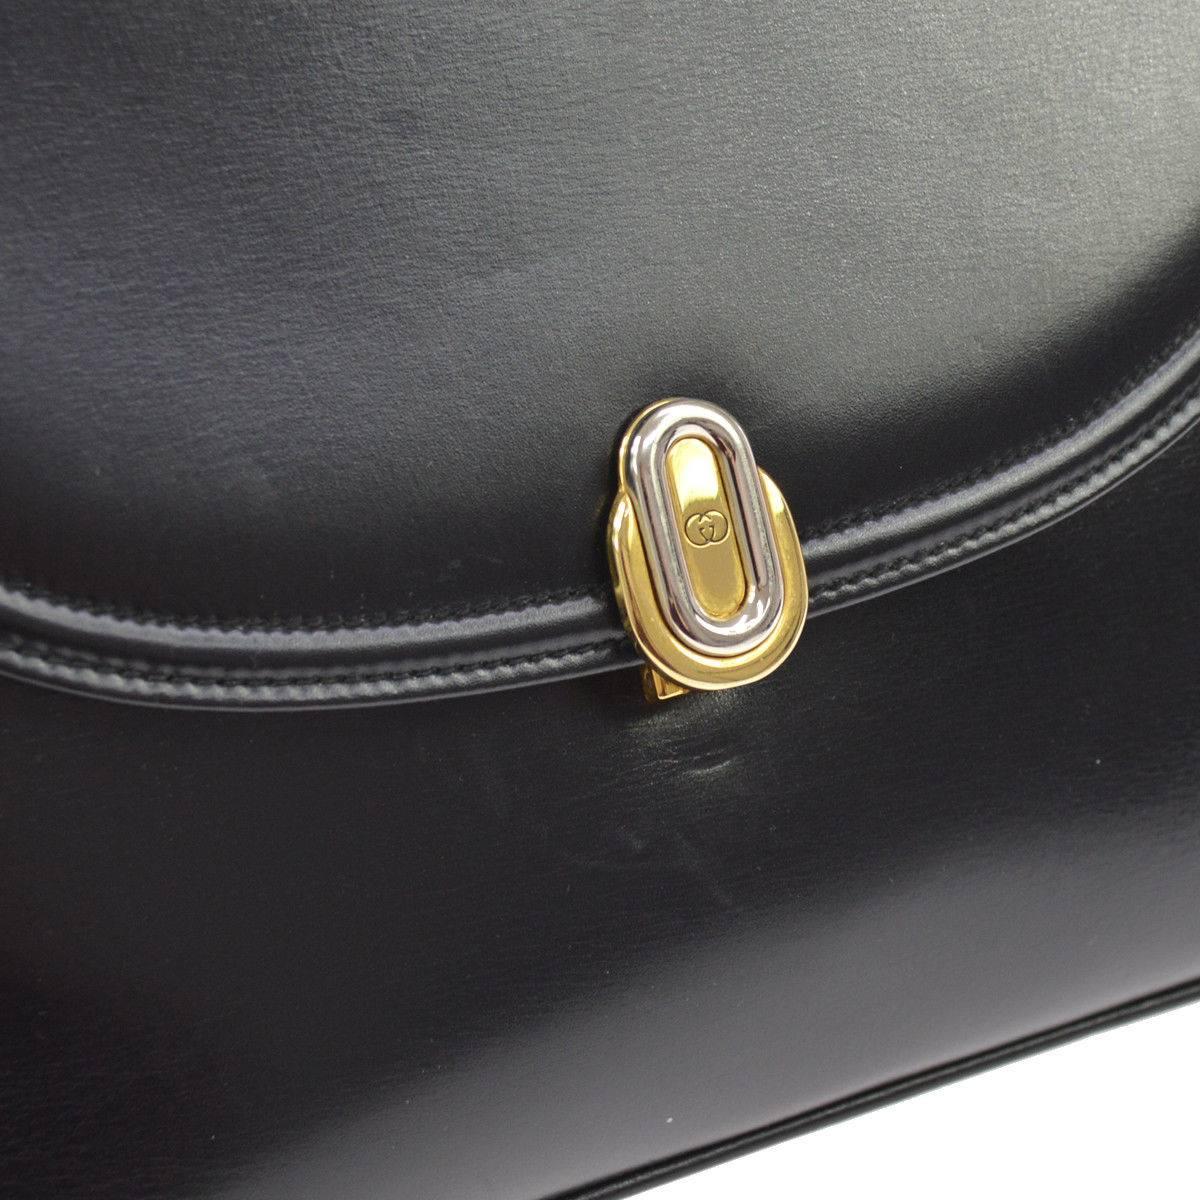 Gucci Black Leather Kelly Style Top Flap Evening Handle Satchel Bag

Leather
Gold and silver tone hardware
Leather lining
Made in Italy
Handle drop 3